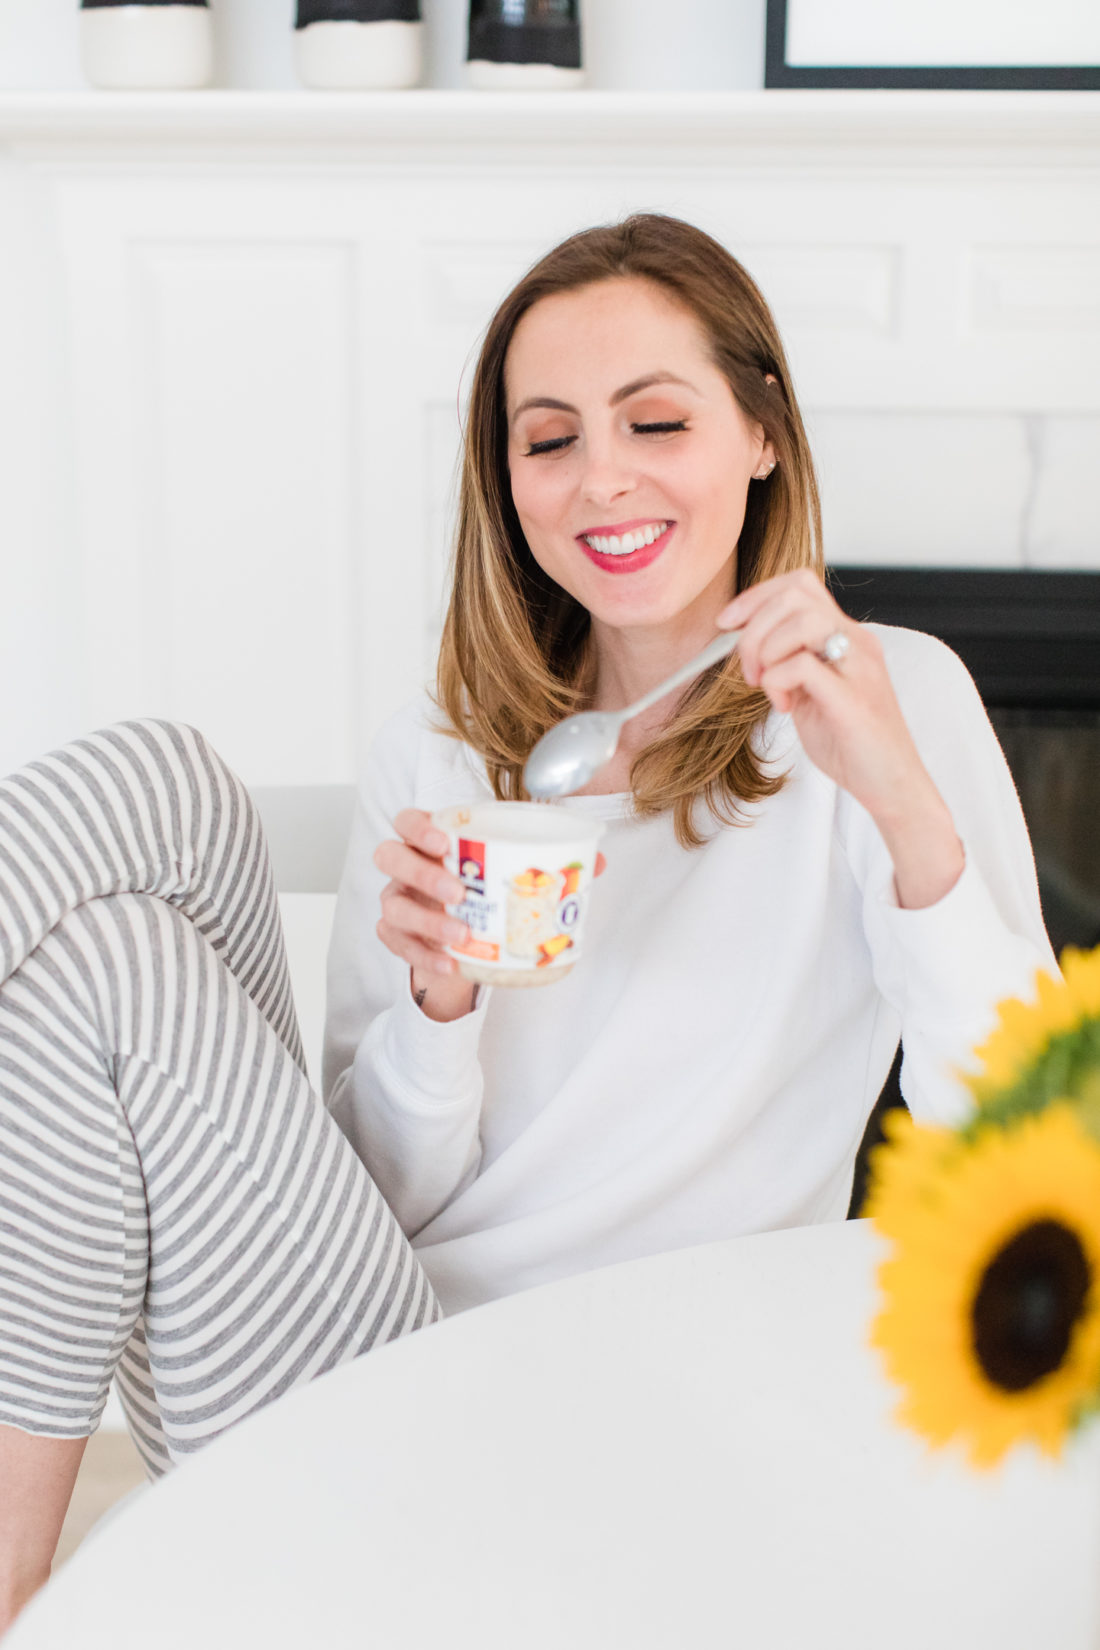 Eva Amurri Martino sits at the kitchen table in a pair of grey and white striped pajamas and eat breakfast next to a vase of sunflowers